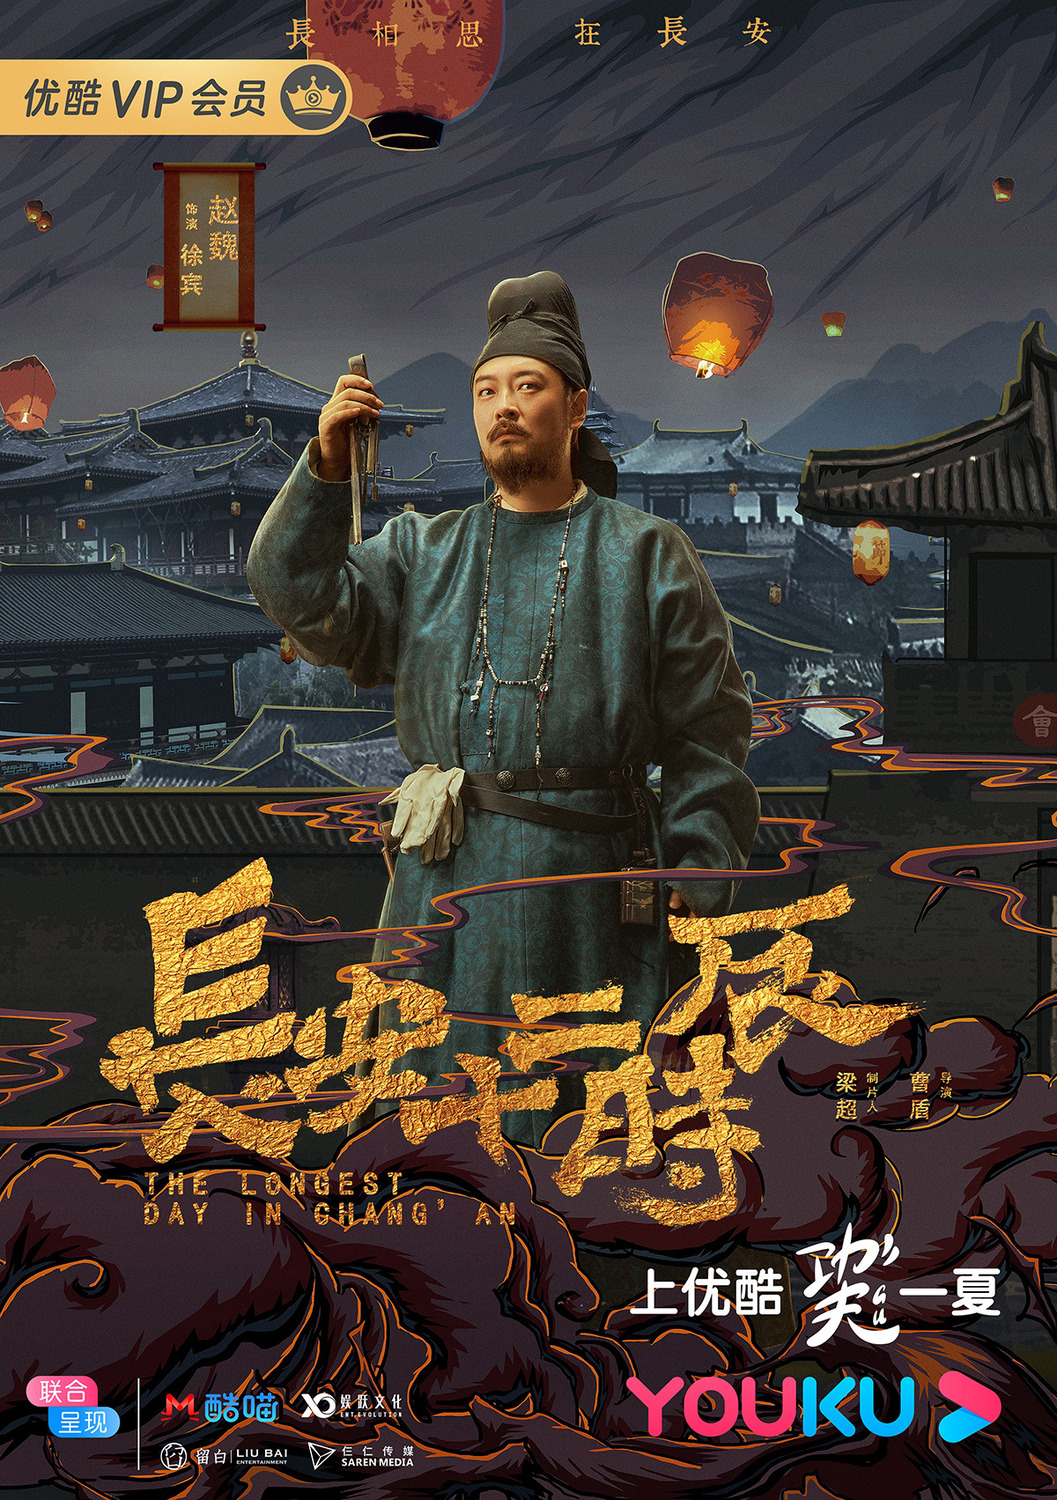 Extra Large TV Poster Image for Chang'an shi er shi chen (#13 of 18)